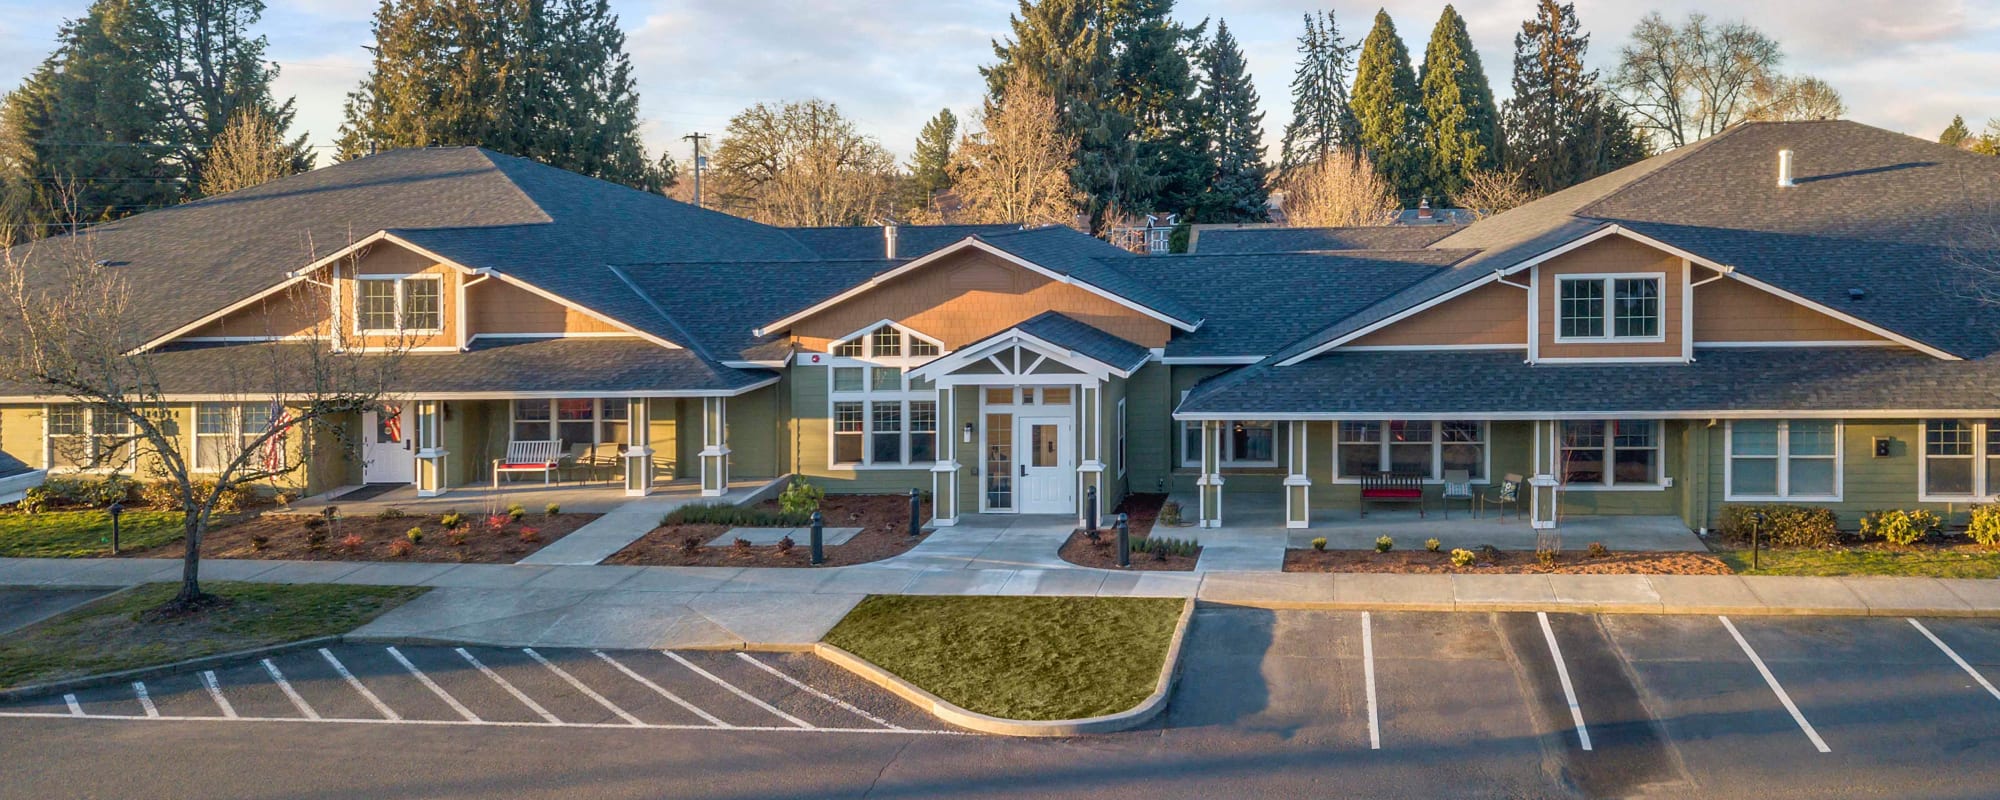 Panoramic view of facilities at The Springs at Clackamas Woods in Milwaukie, Oregon